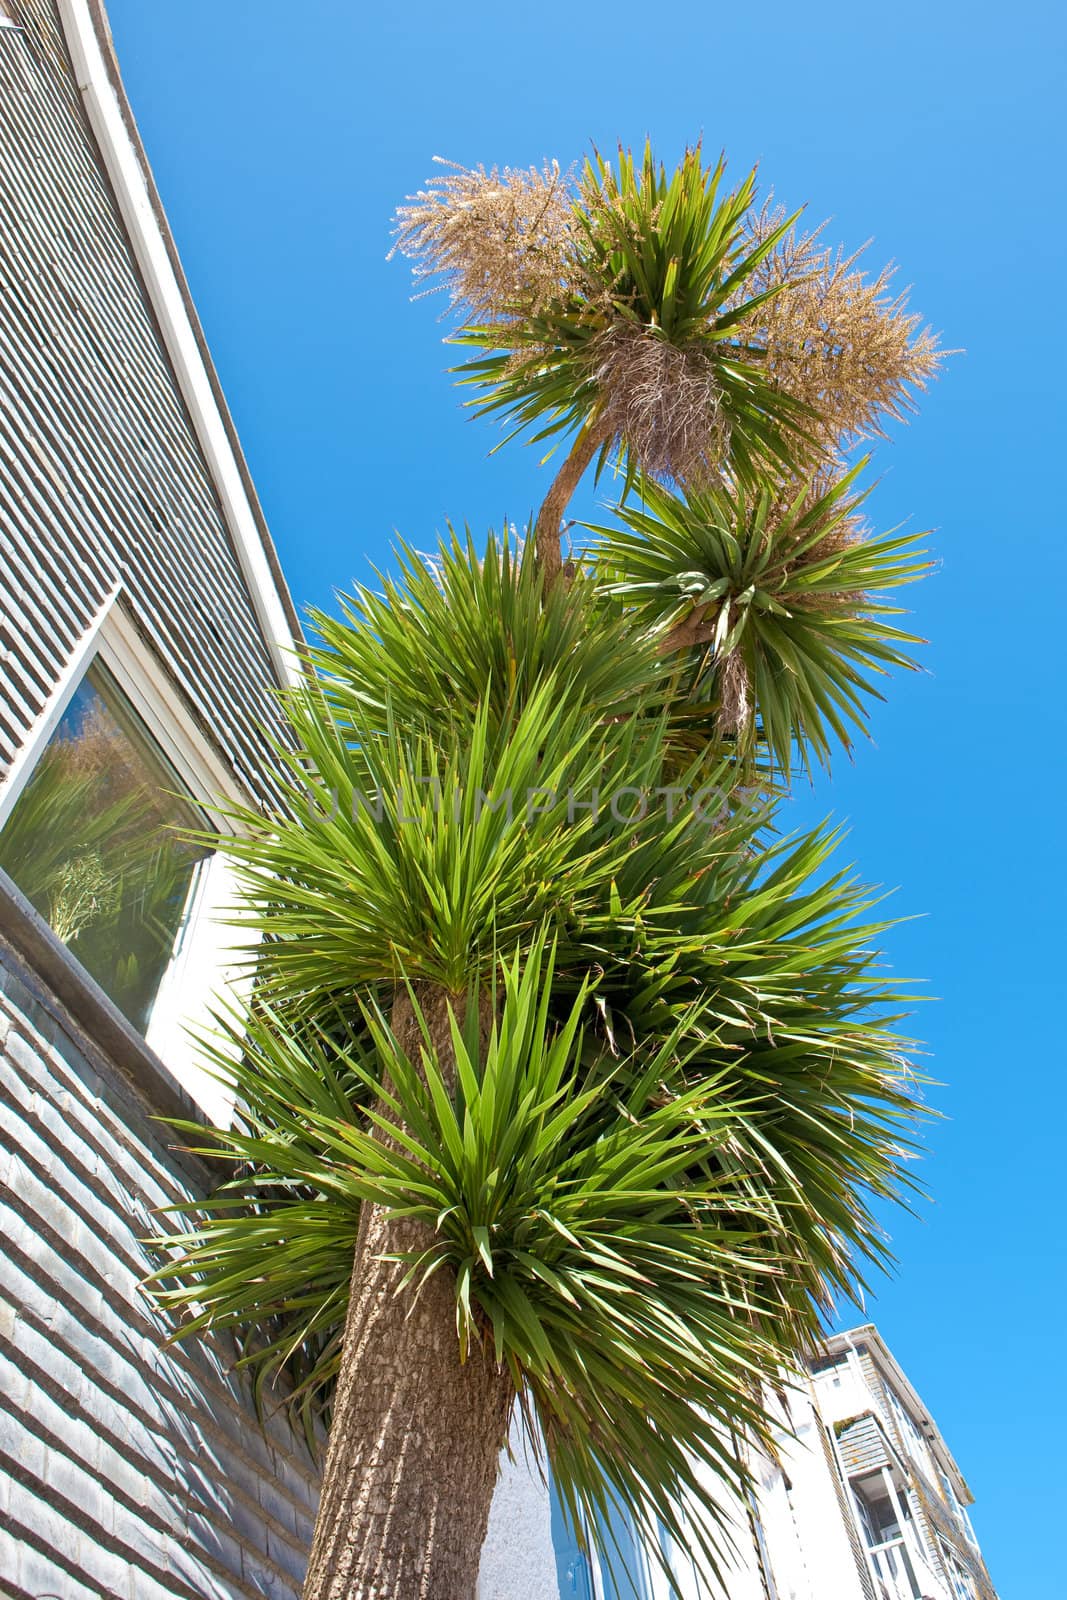 Palm tree against a vibrant blue sky in St Ives, Cornwall by trgowanlock